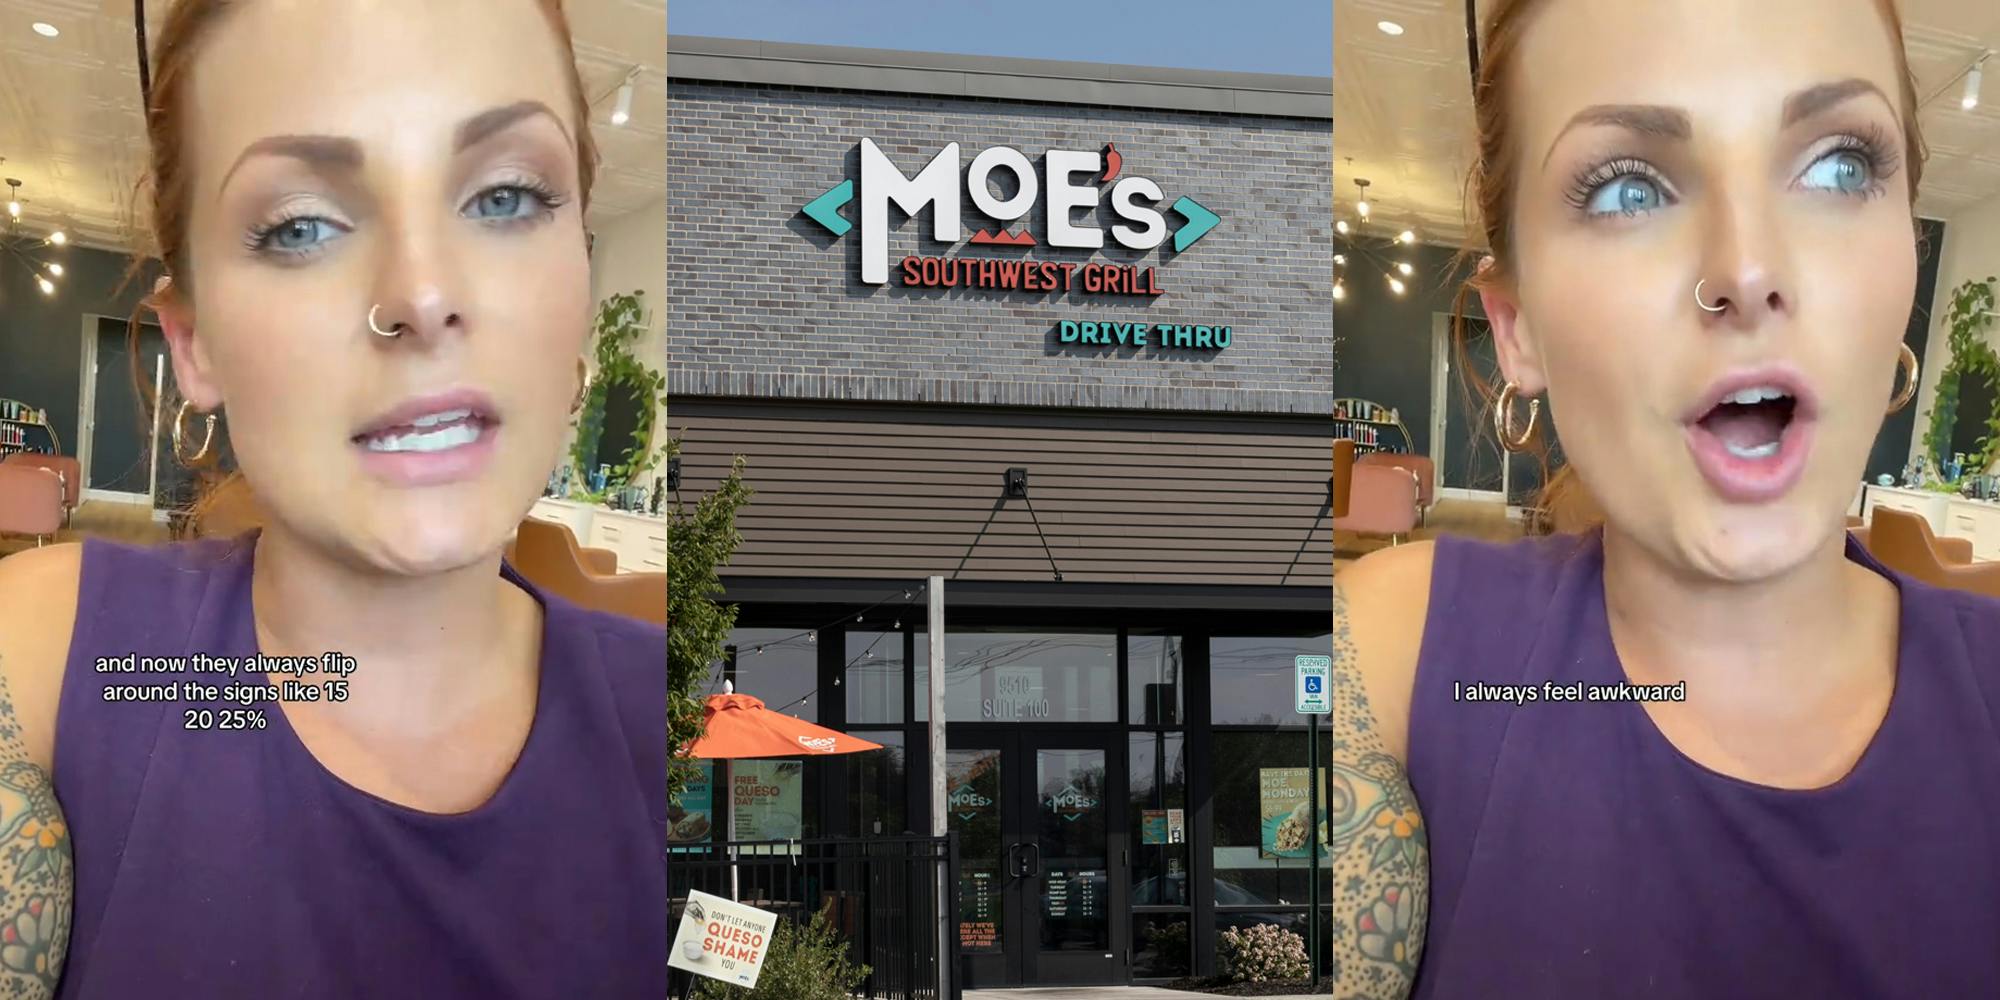 Moe's customer speaking with caption "and now they always flip around the signs like 20 25%" (l) Moe's building with sign (c) Moe's customer speaking with caption "I always feel awkward" (r)